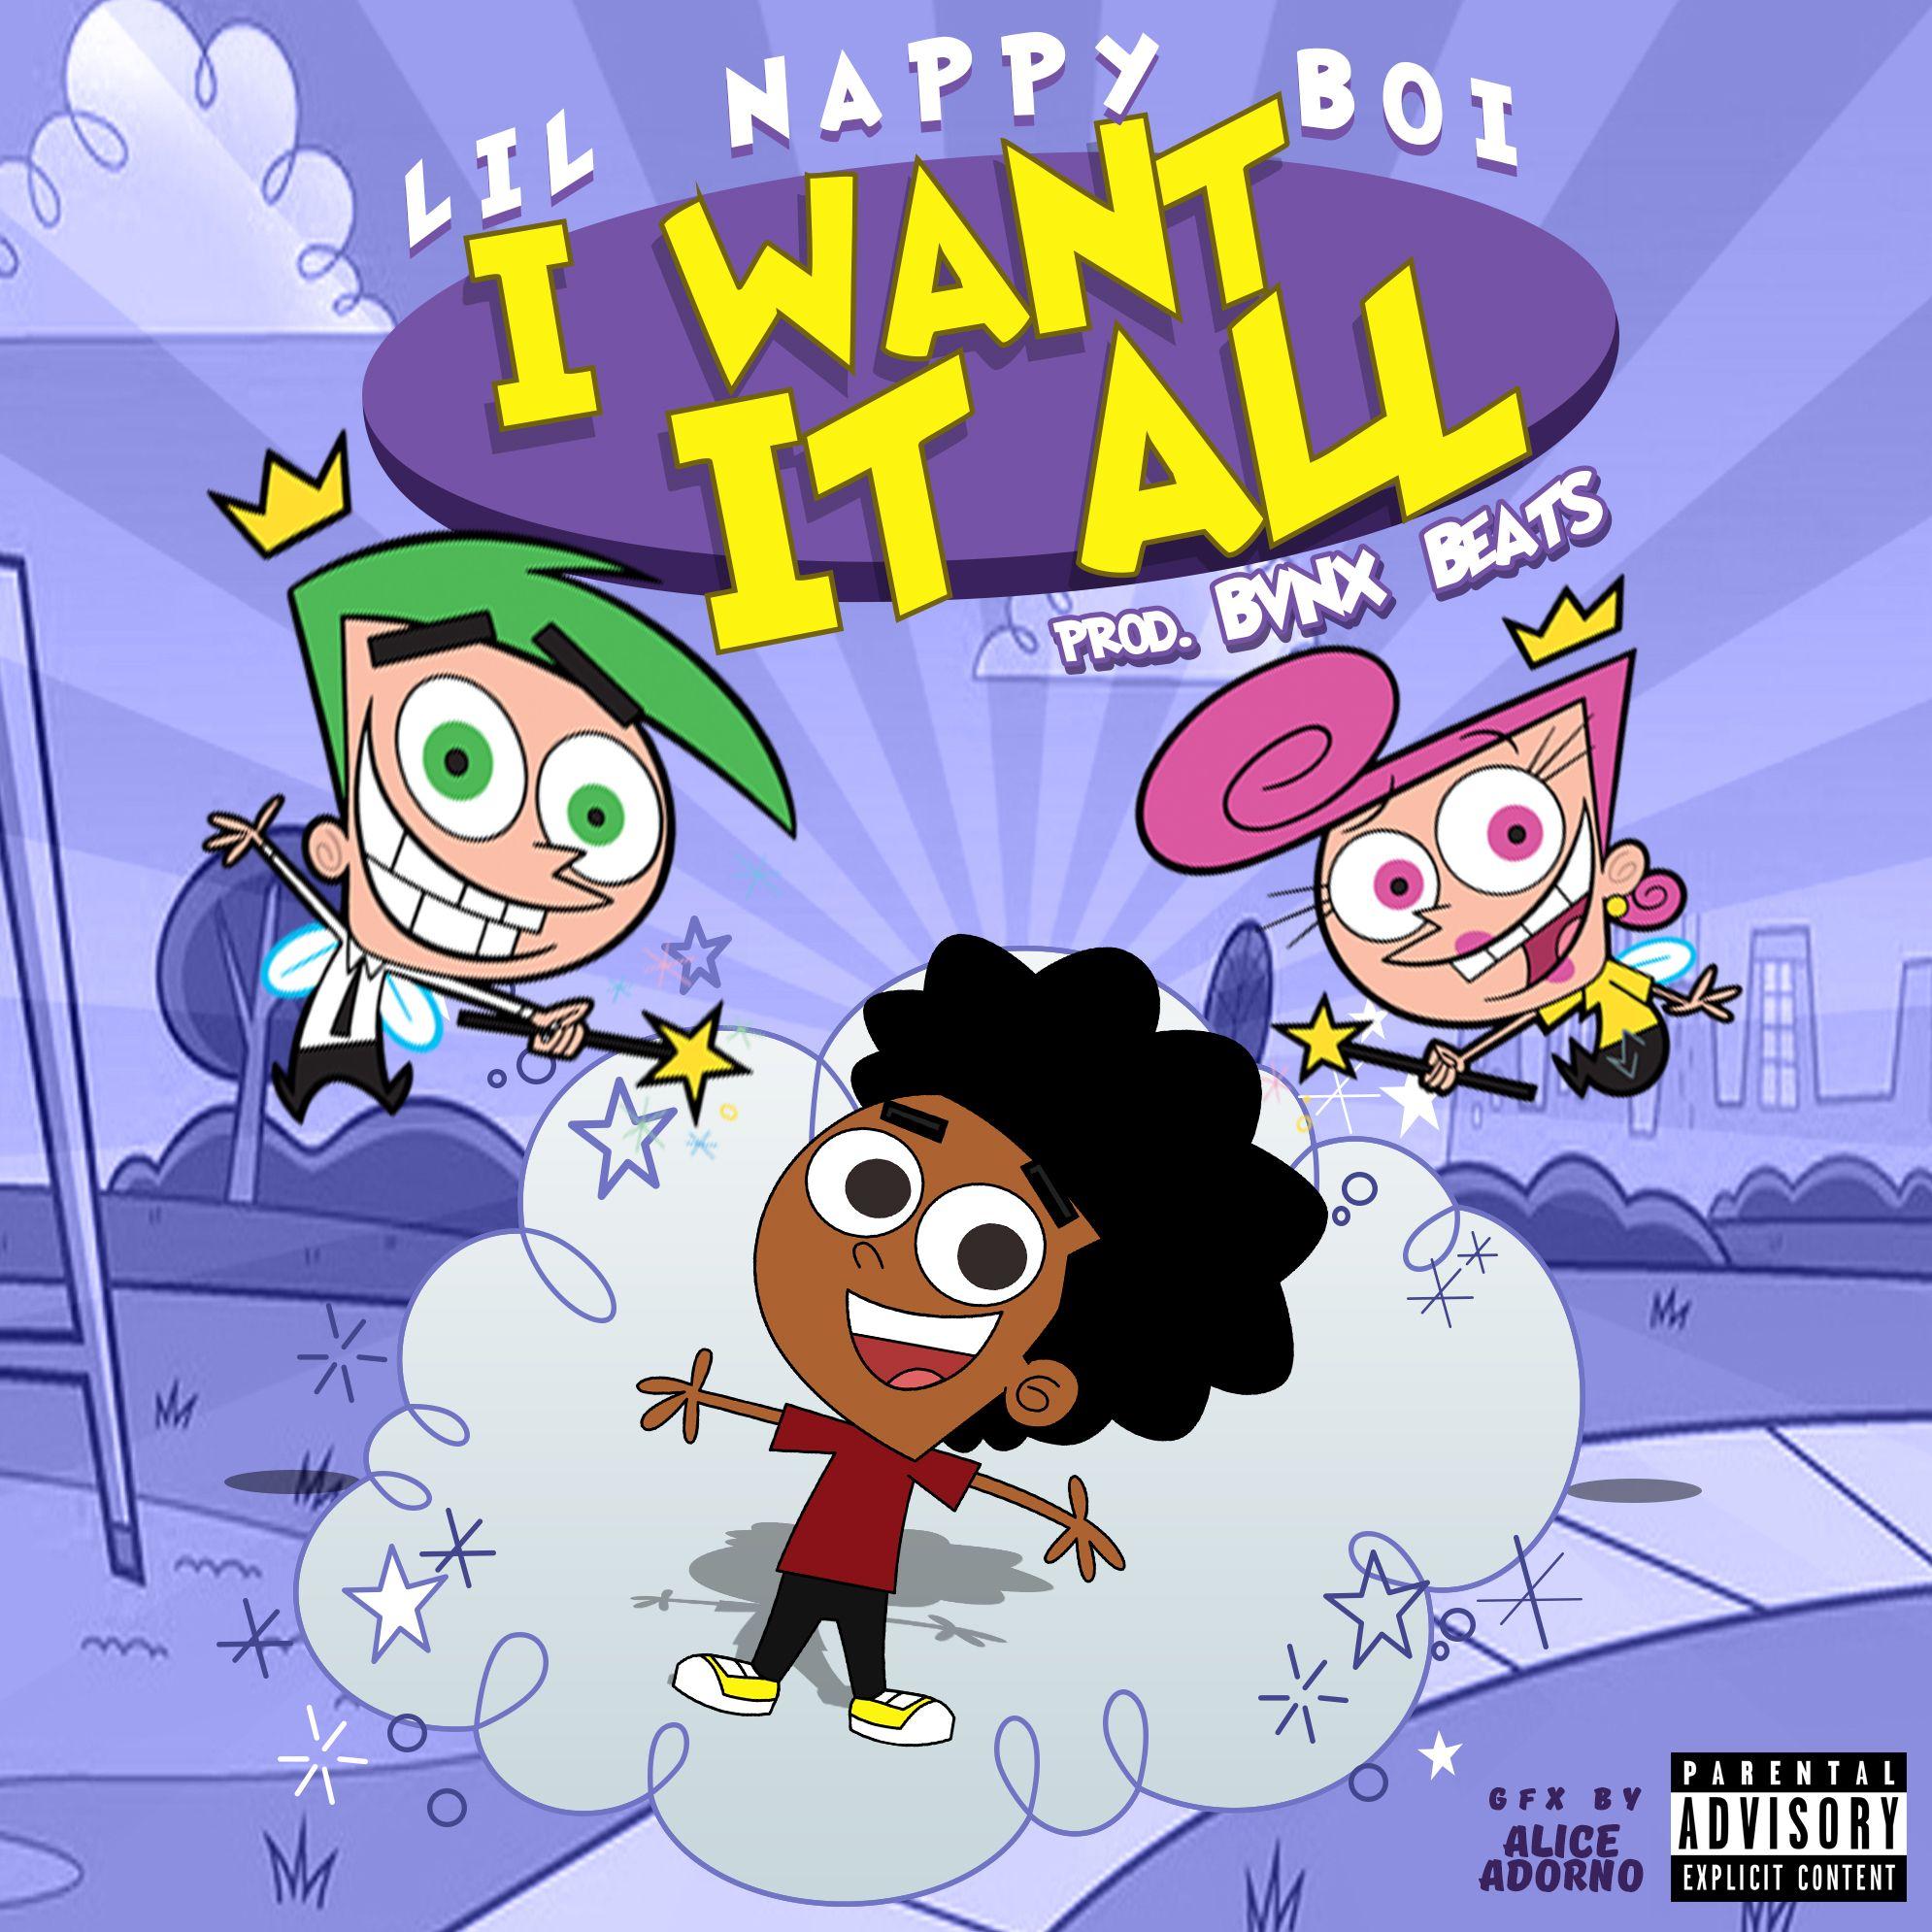 Cover art with Fairly odd Parents style made